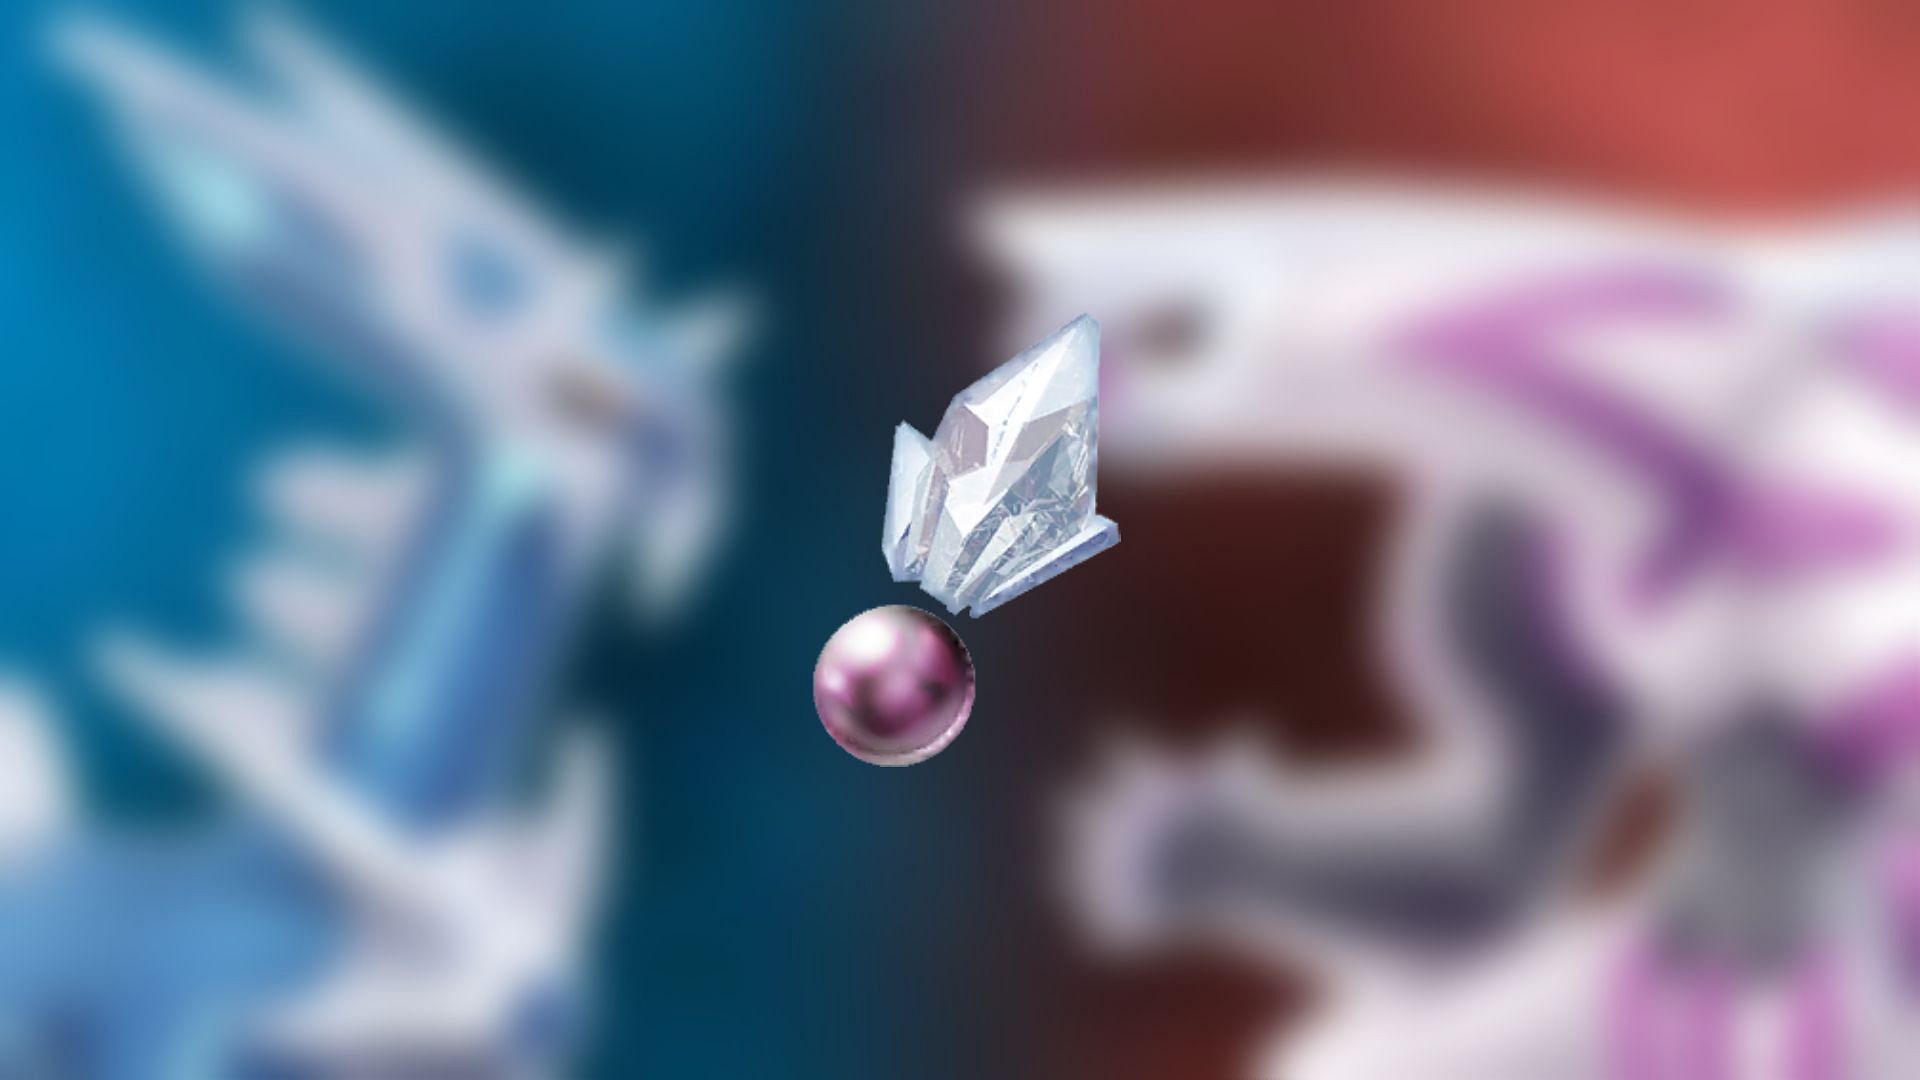 Official artwork for the Sinnoh Stone